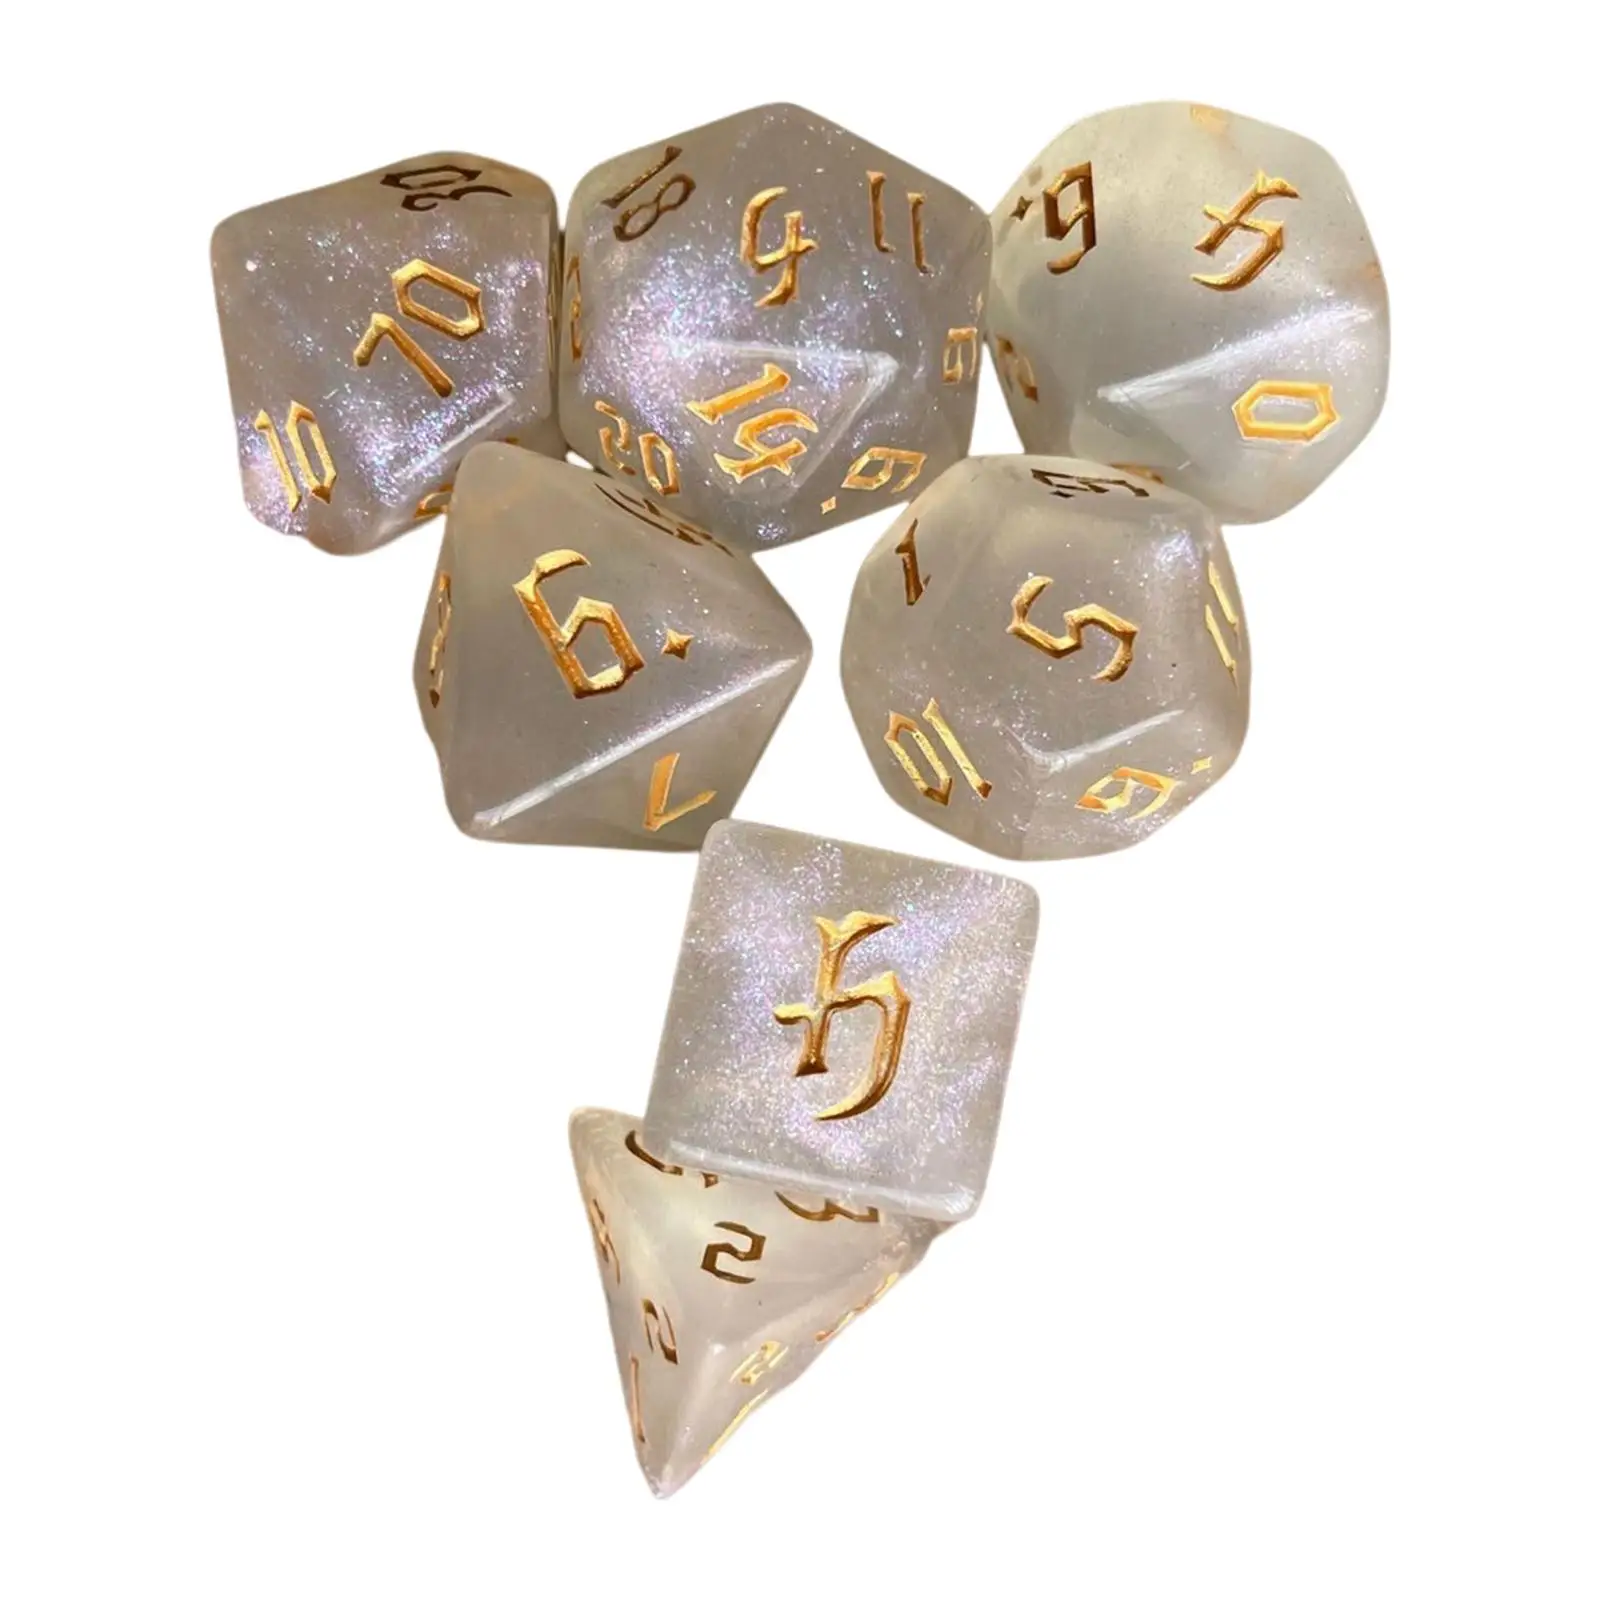 7x Polyhedral Dices Set Durable Wear Resistant Multifunctional D8 D10 D12 D20 Toys Engraved Rolling Dices for Parties KTV